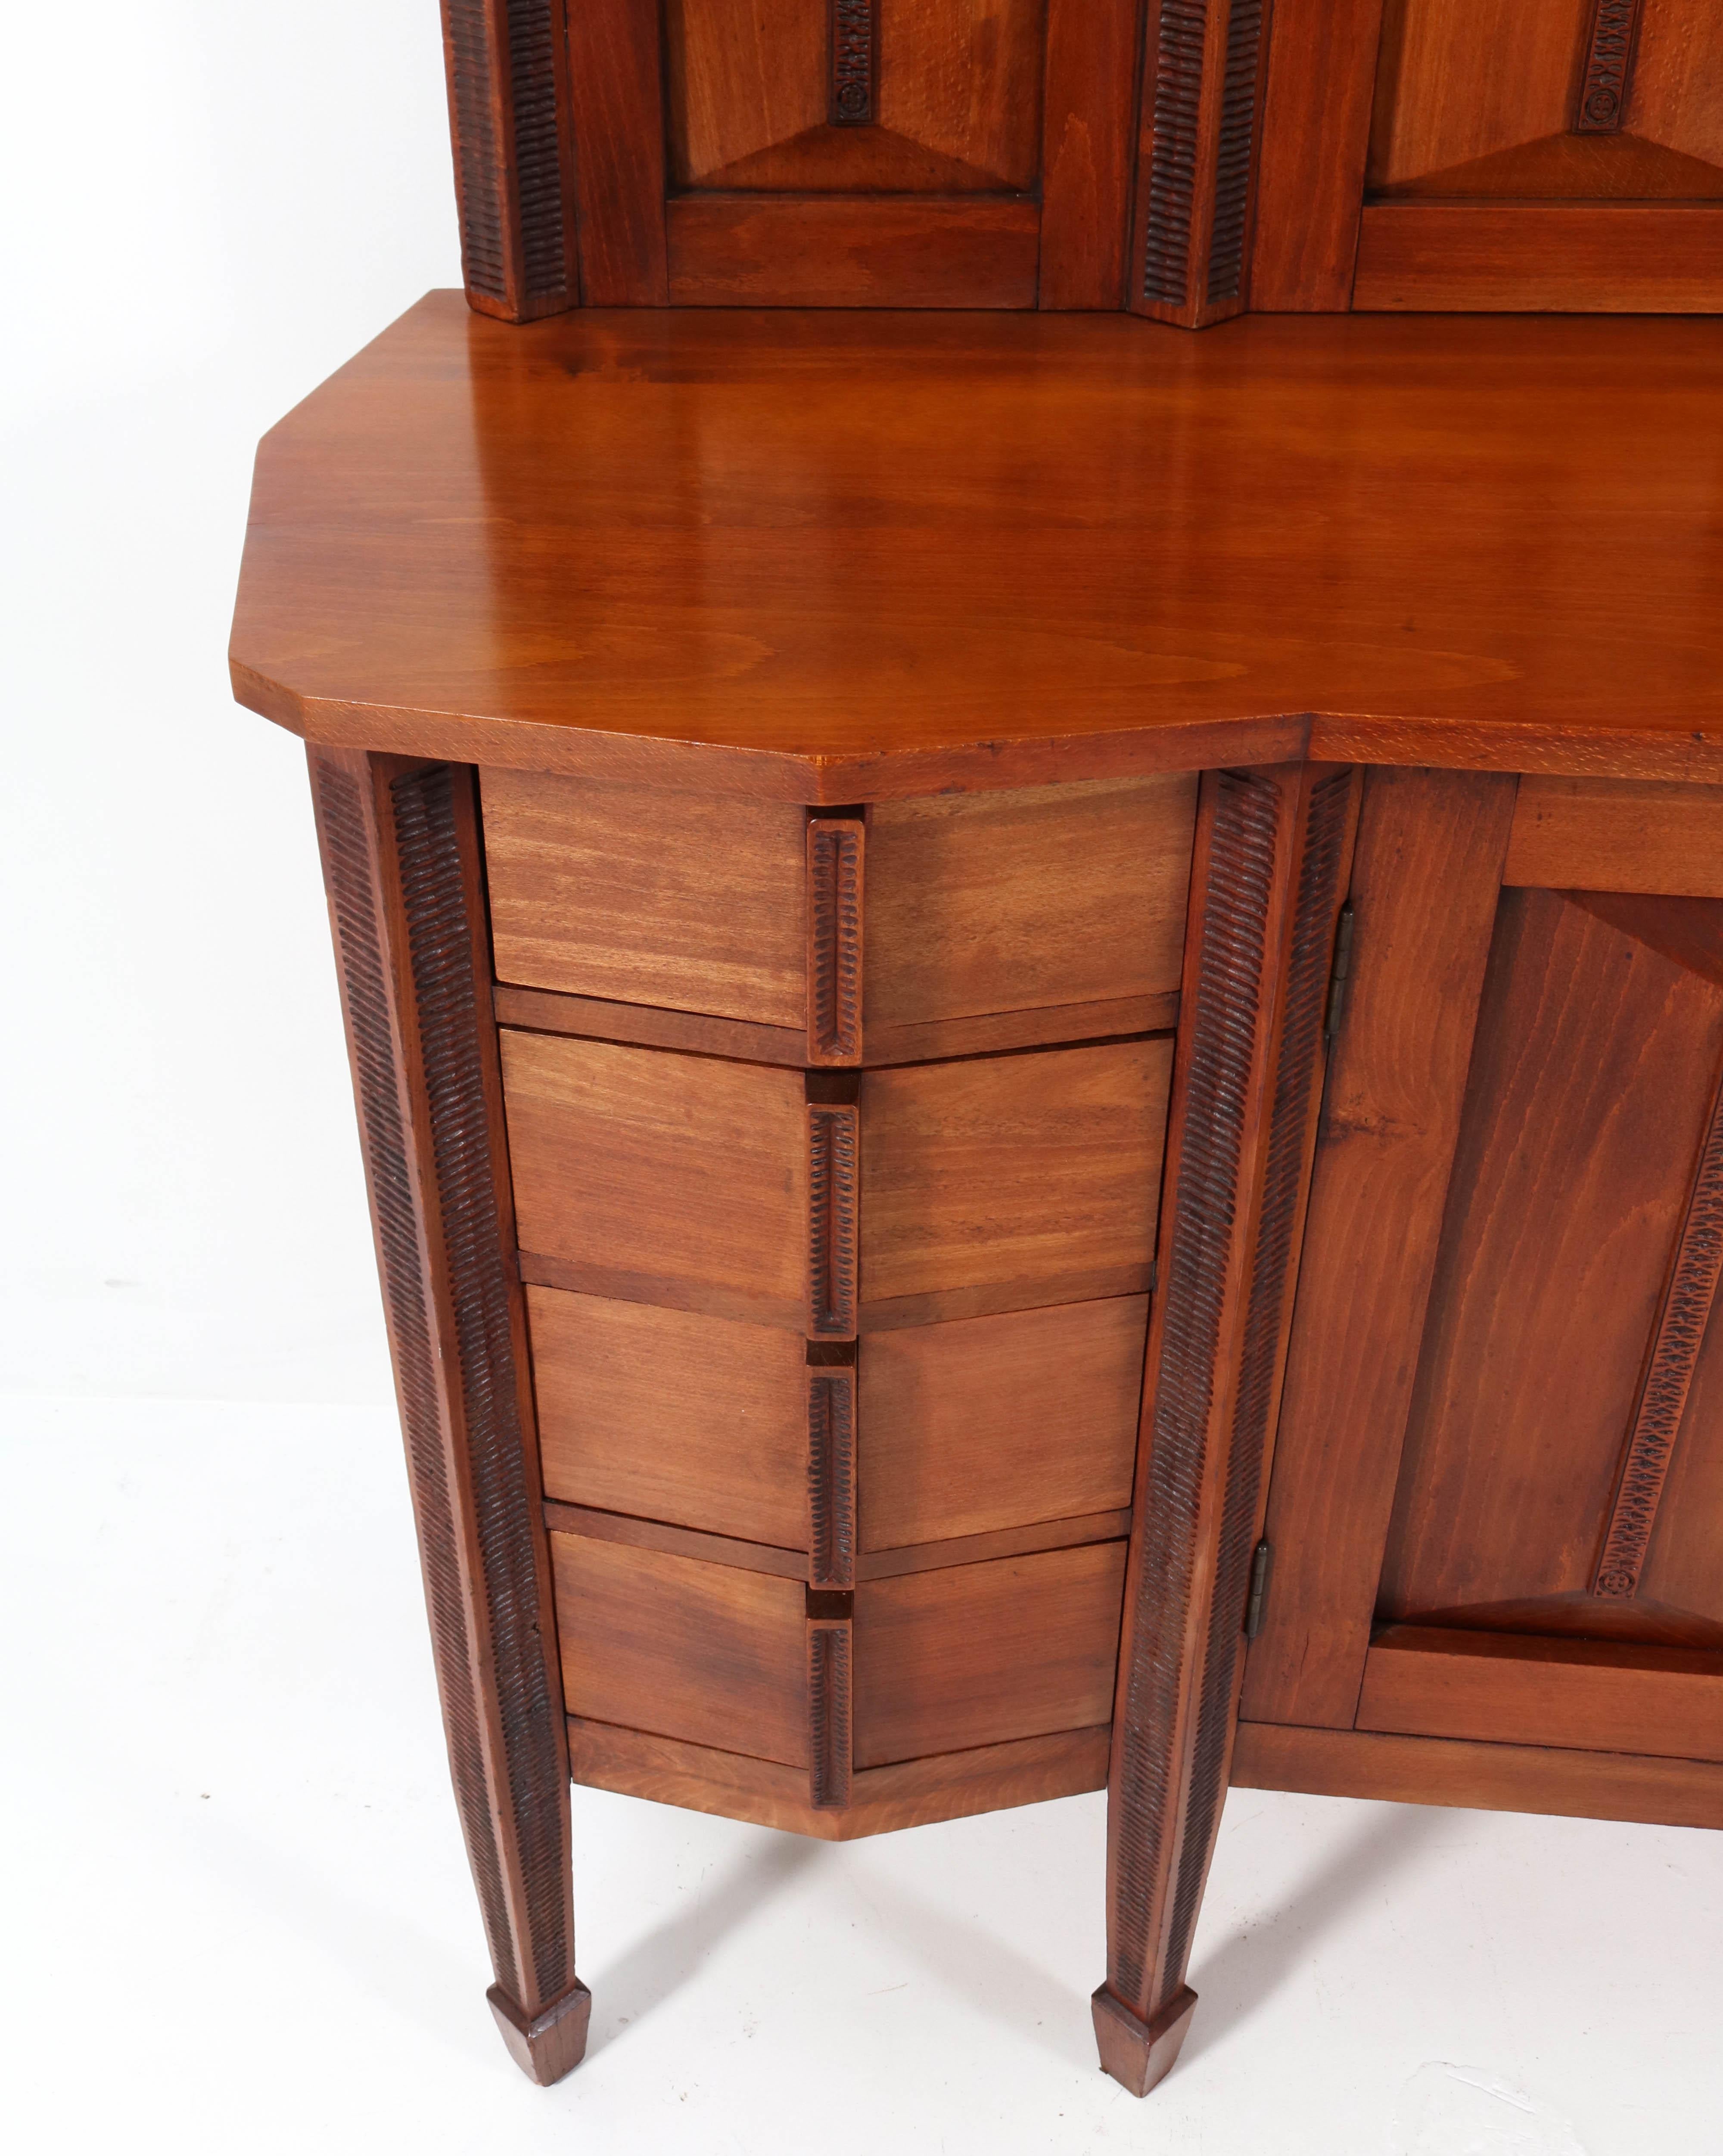 Stained Art Deco Amsterdamse School Credenza or Sideboard, 1920s For Sale